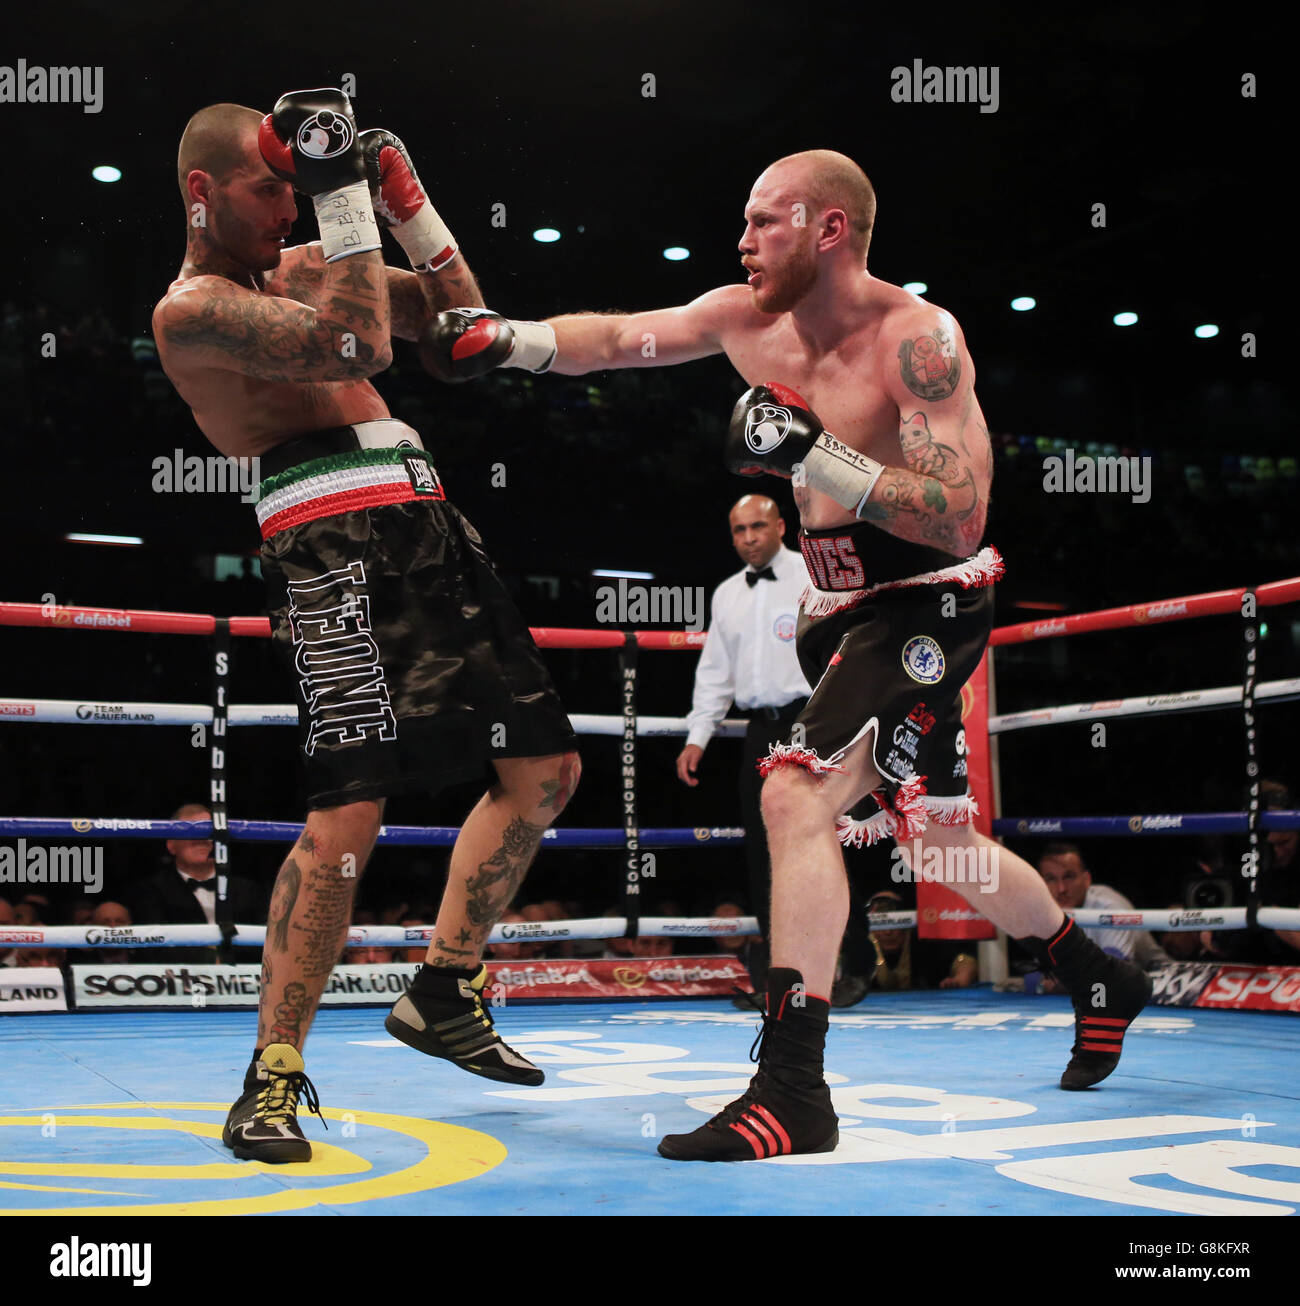 George Groves (right) and Andrea Di Luisa during their International Super-Middleweight contest at the Copper Box Arena, London. Stock Photo